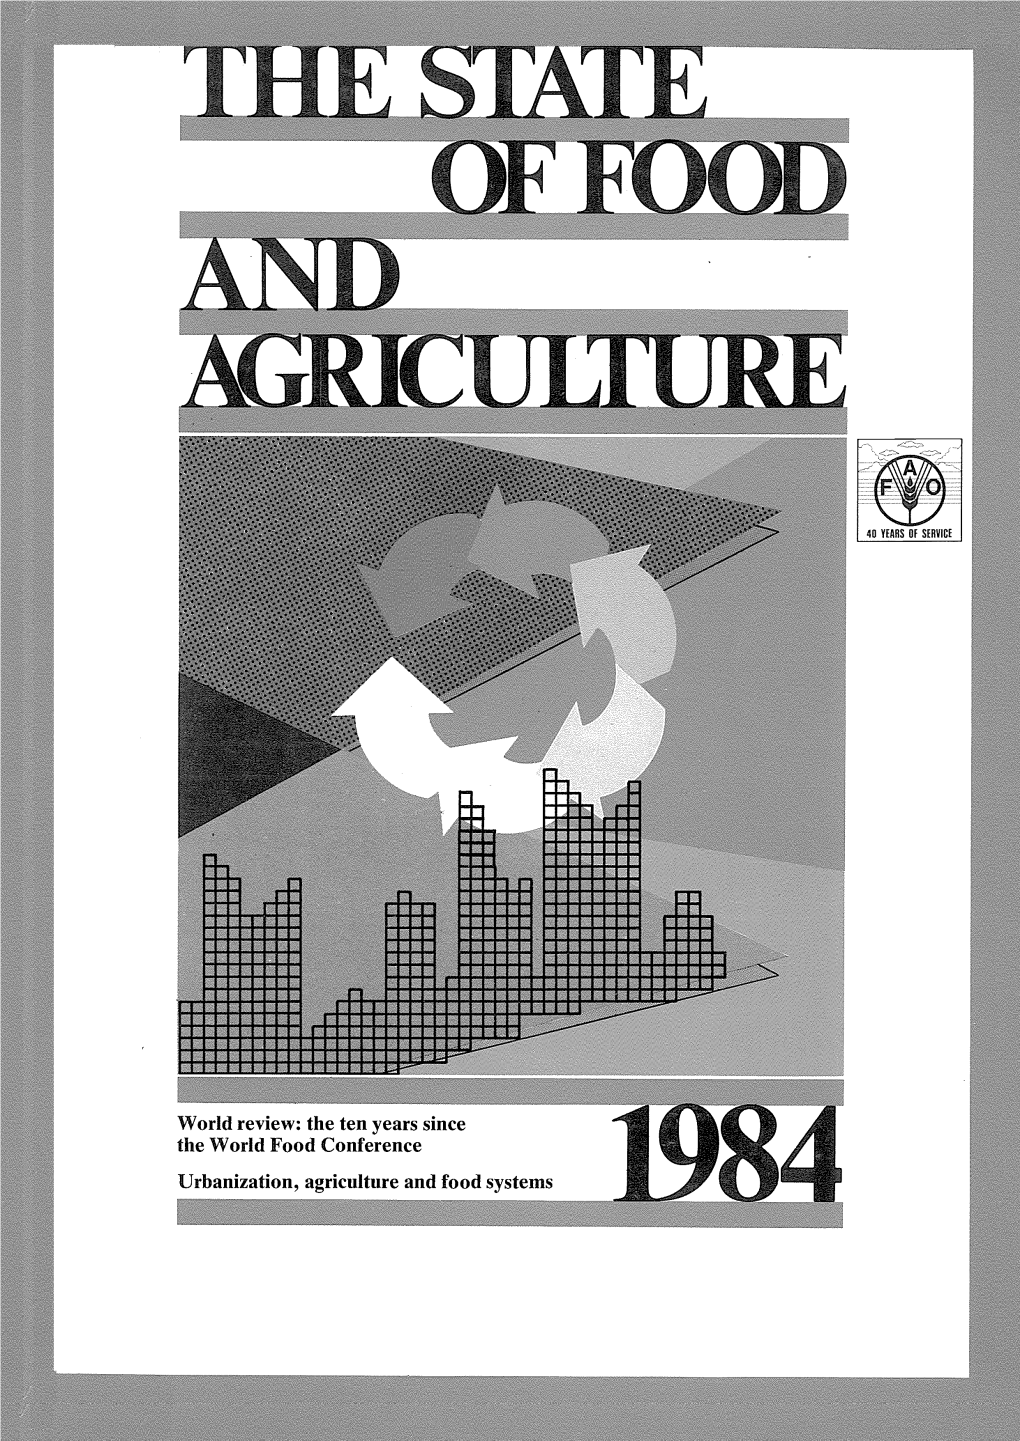 The State of Food and Agriculture, 1984